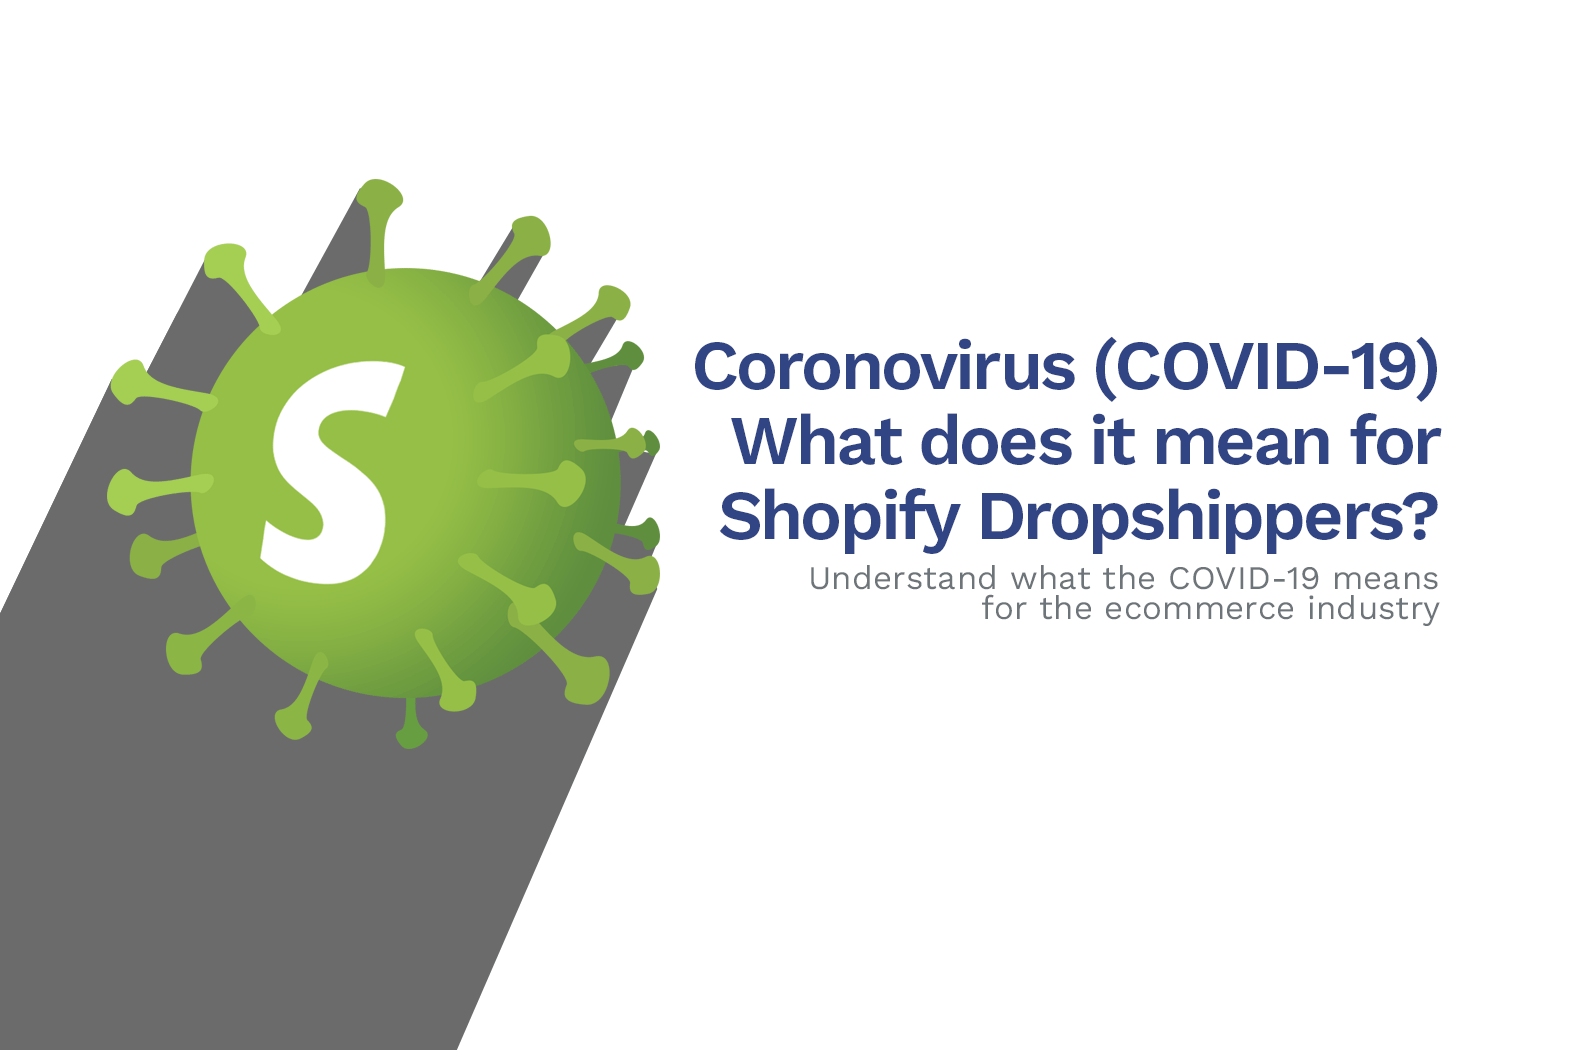 What The Coronavirus (COVID-19) Means For Shopify Dropshippers